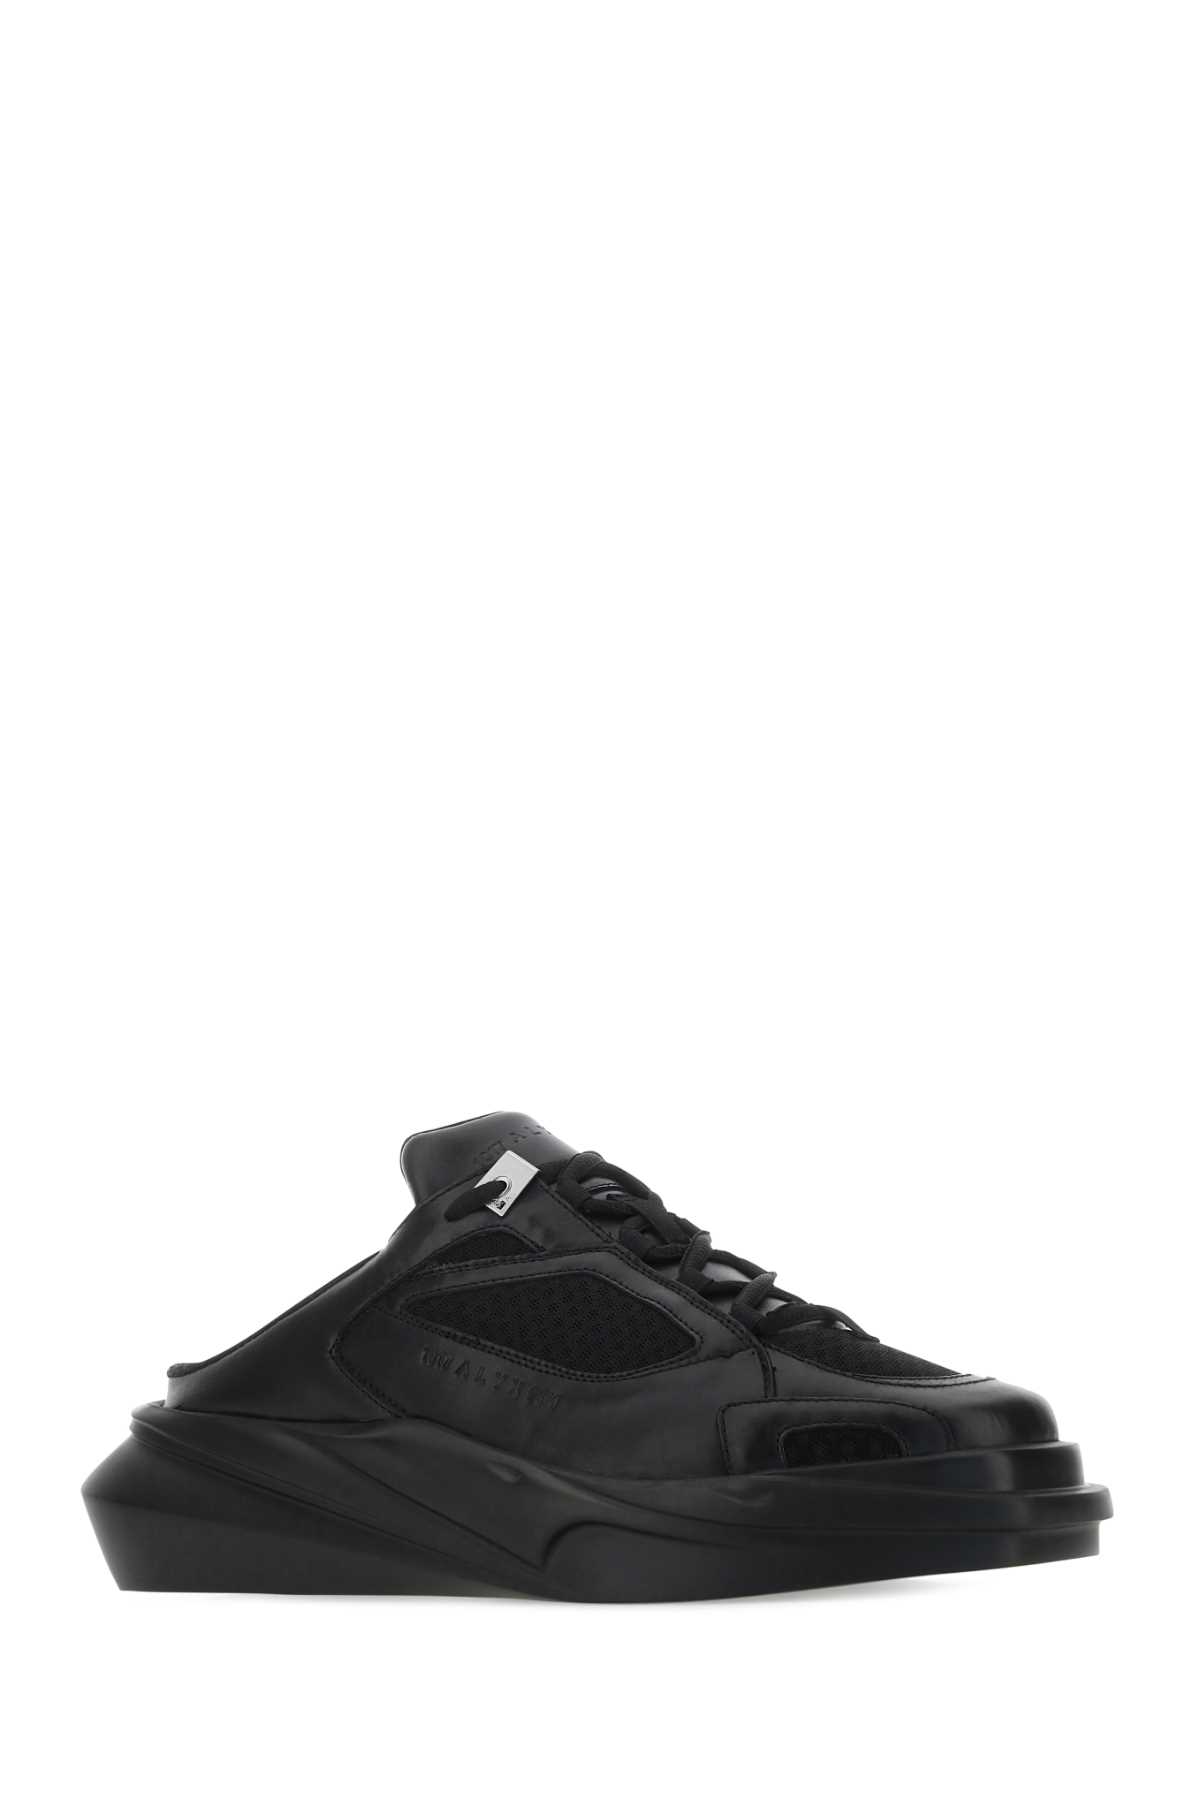 Shop Alyx Black Leather Mono Hiking Slippers In Blk0001